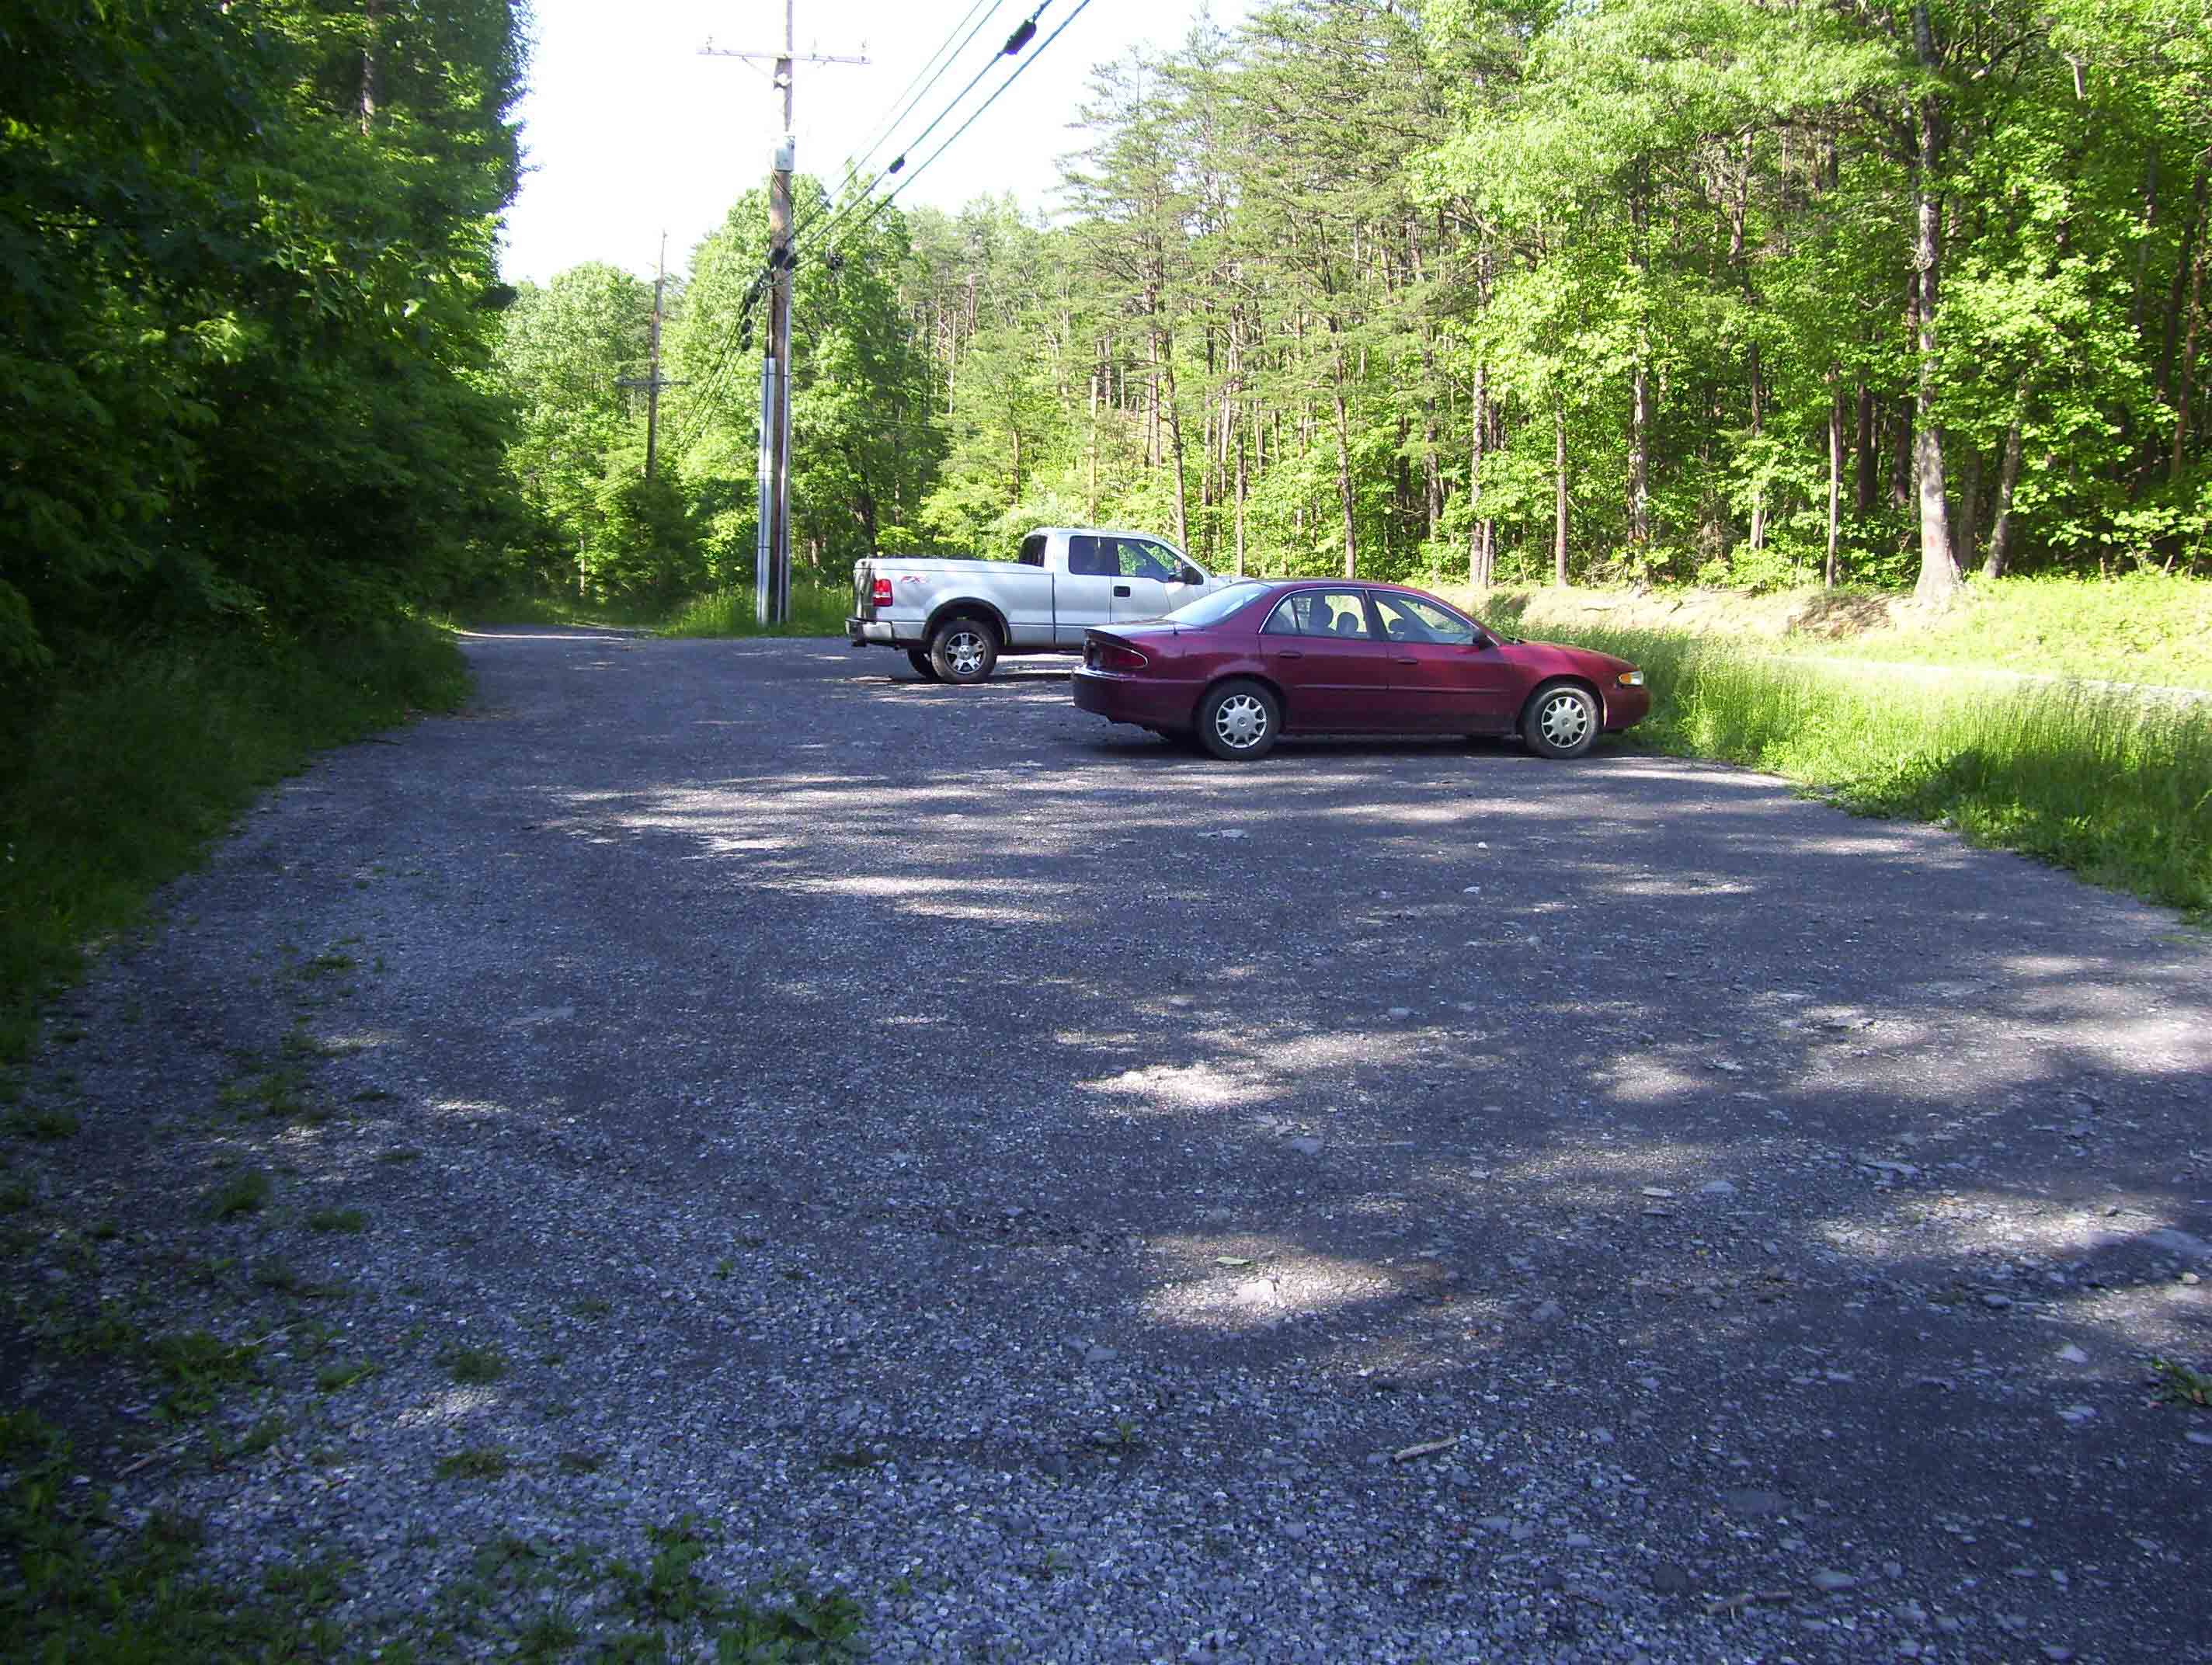 Parking area for yellow-blazed Andy  Layne Trail. From here it is about 3 miles to the AT in Scorched Earth Gap at mm 10.0  Courtesy dlcul@conncoll.edu